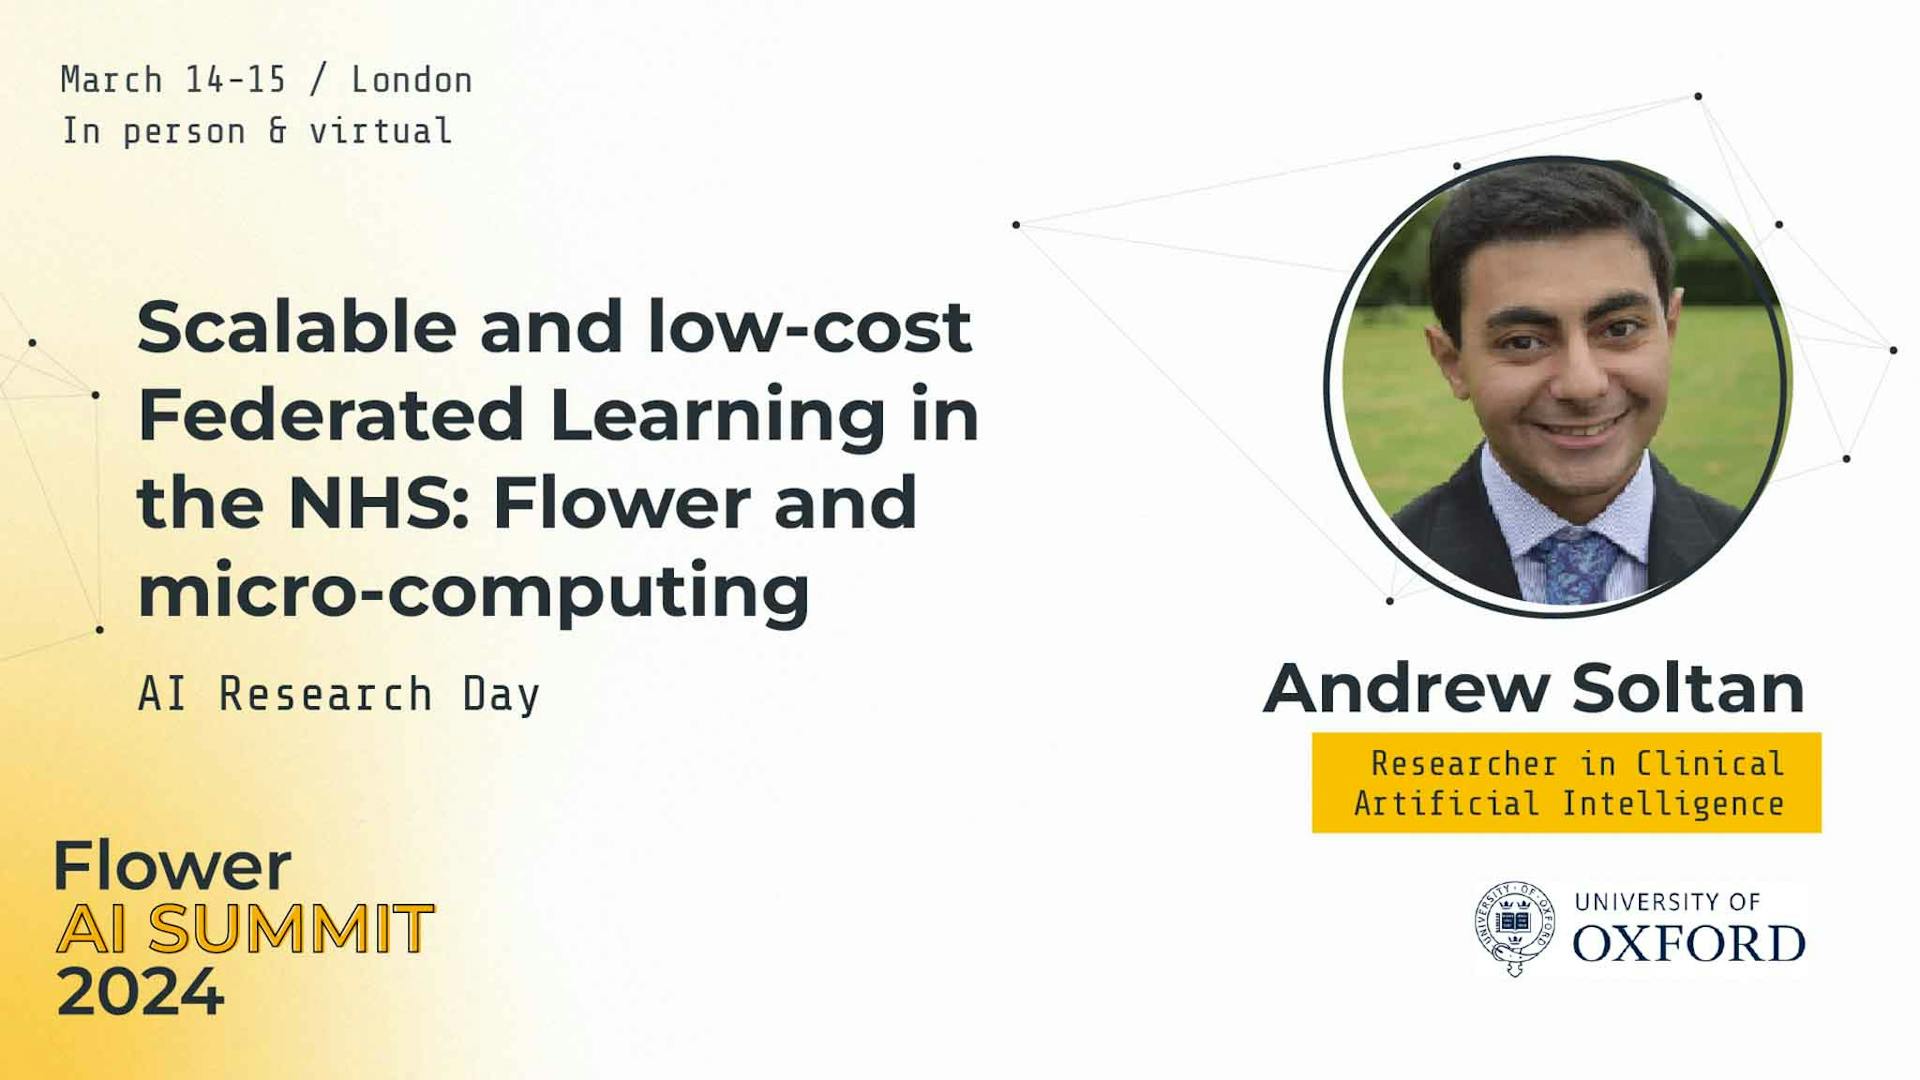 Scalable and low-cost FL in the NHS: Flower and micro-computing, Andrew Soltan